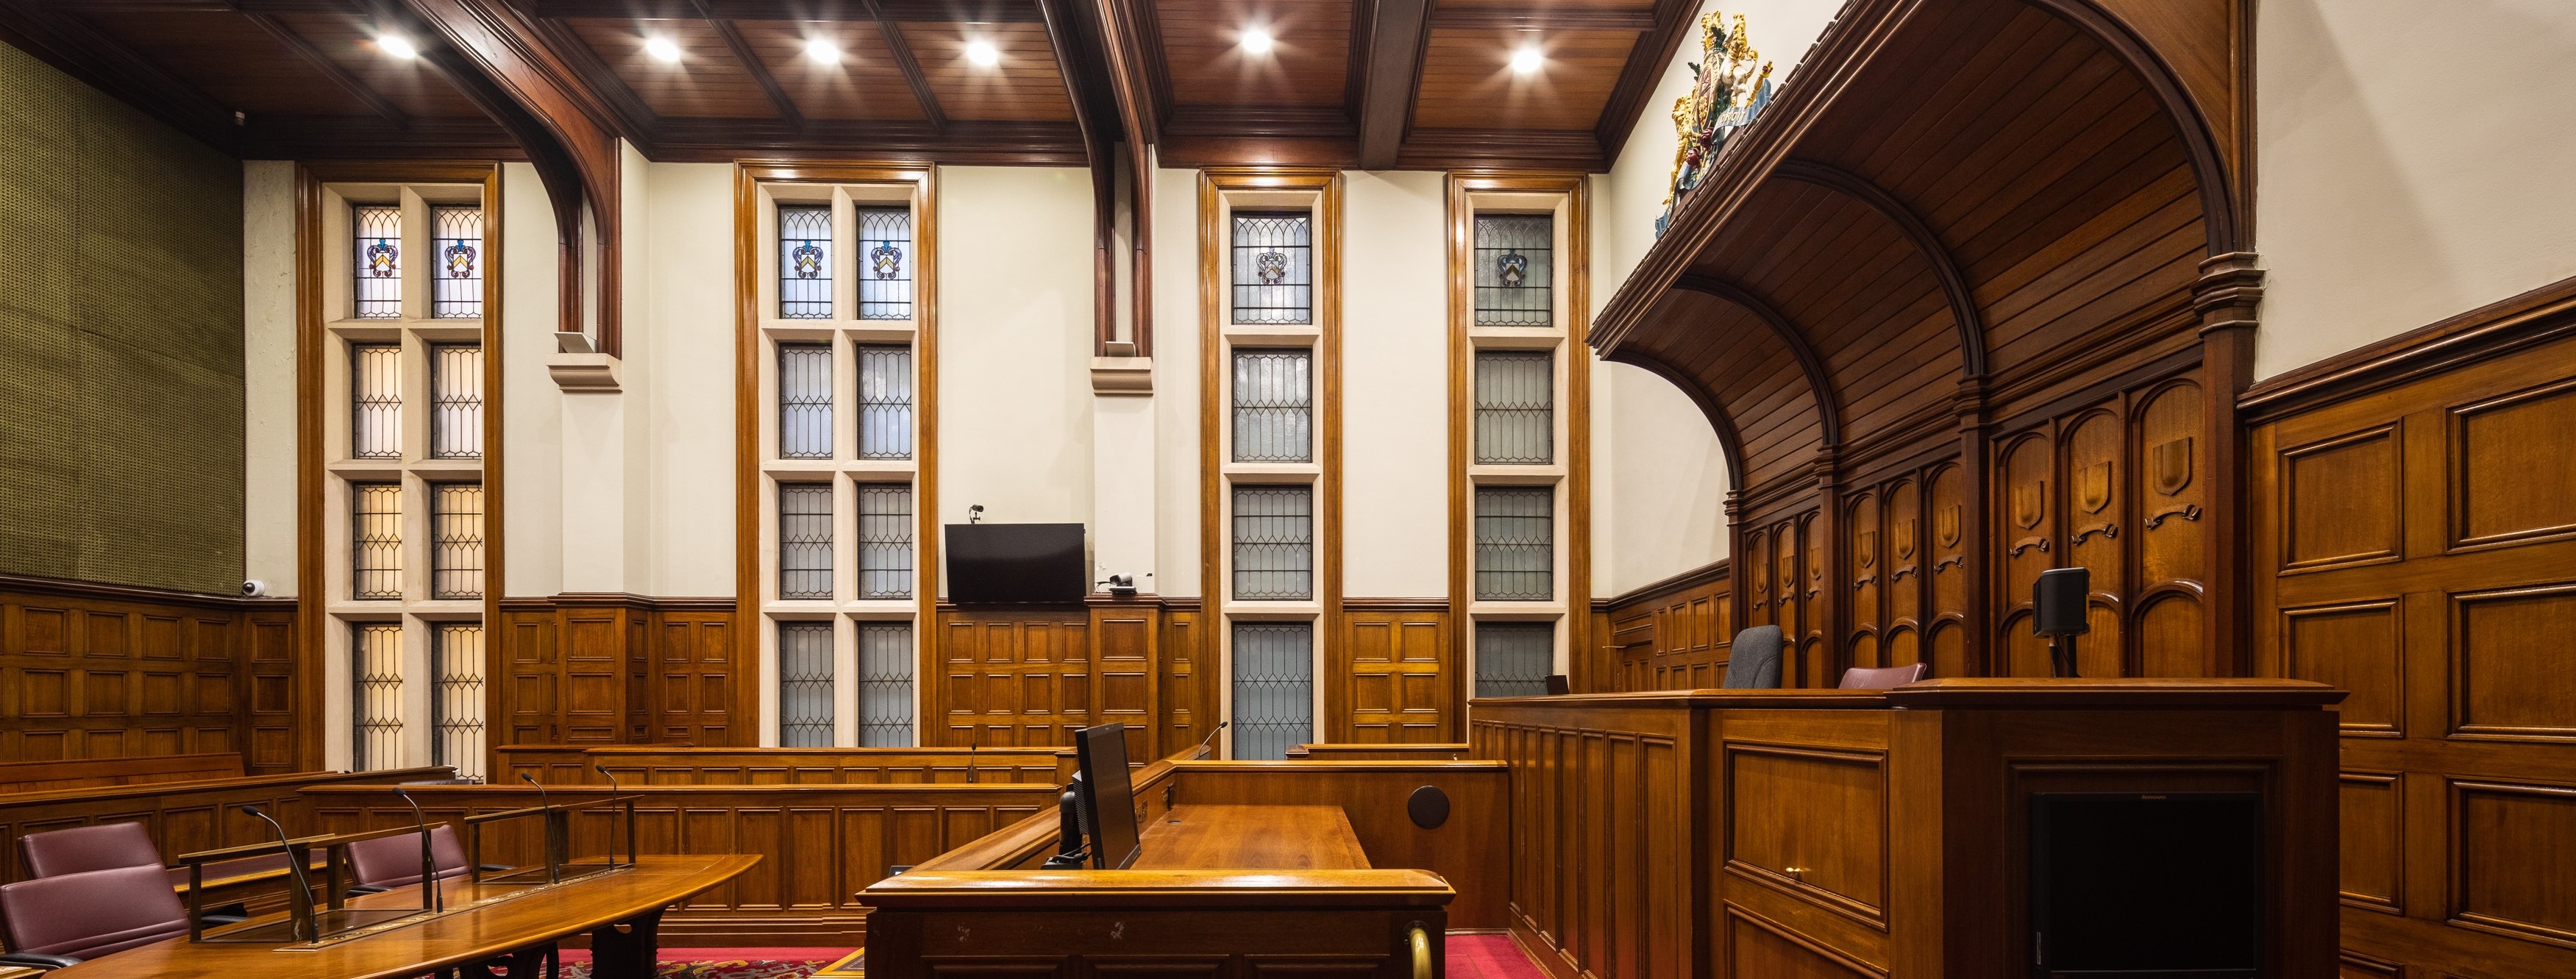 King Street Courtroom 5